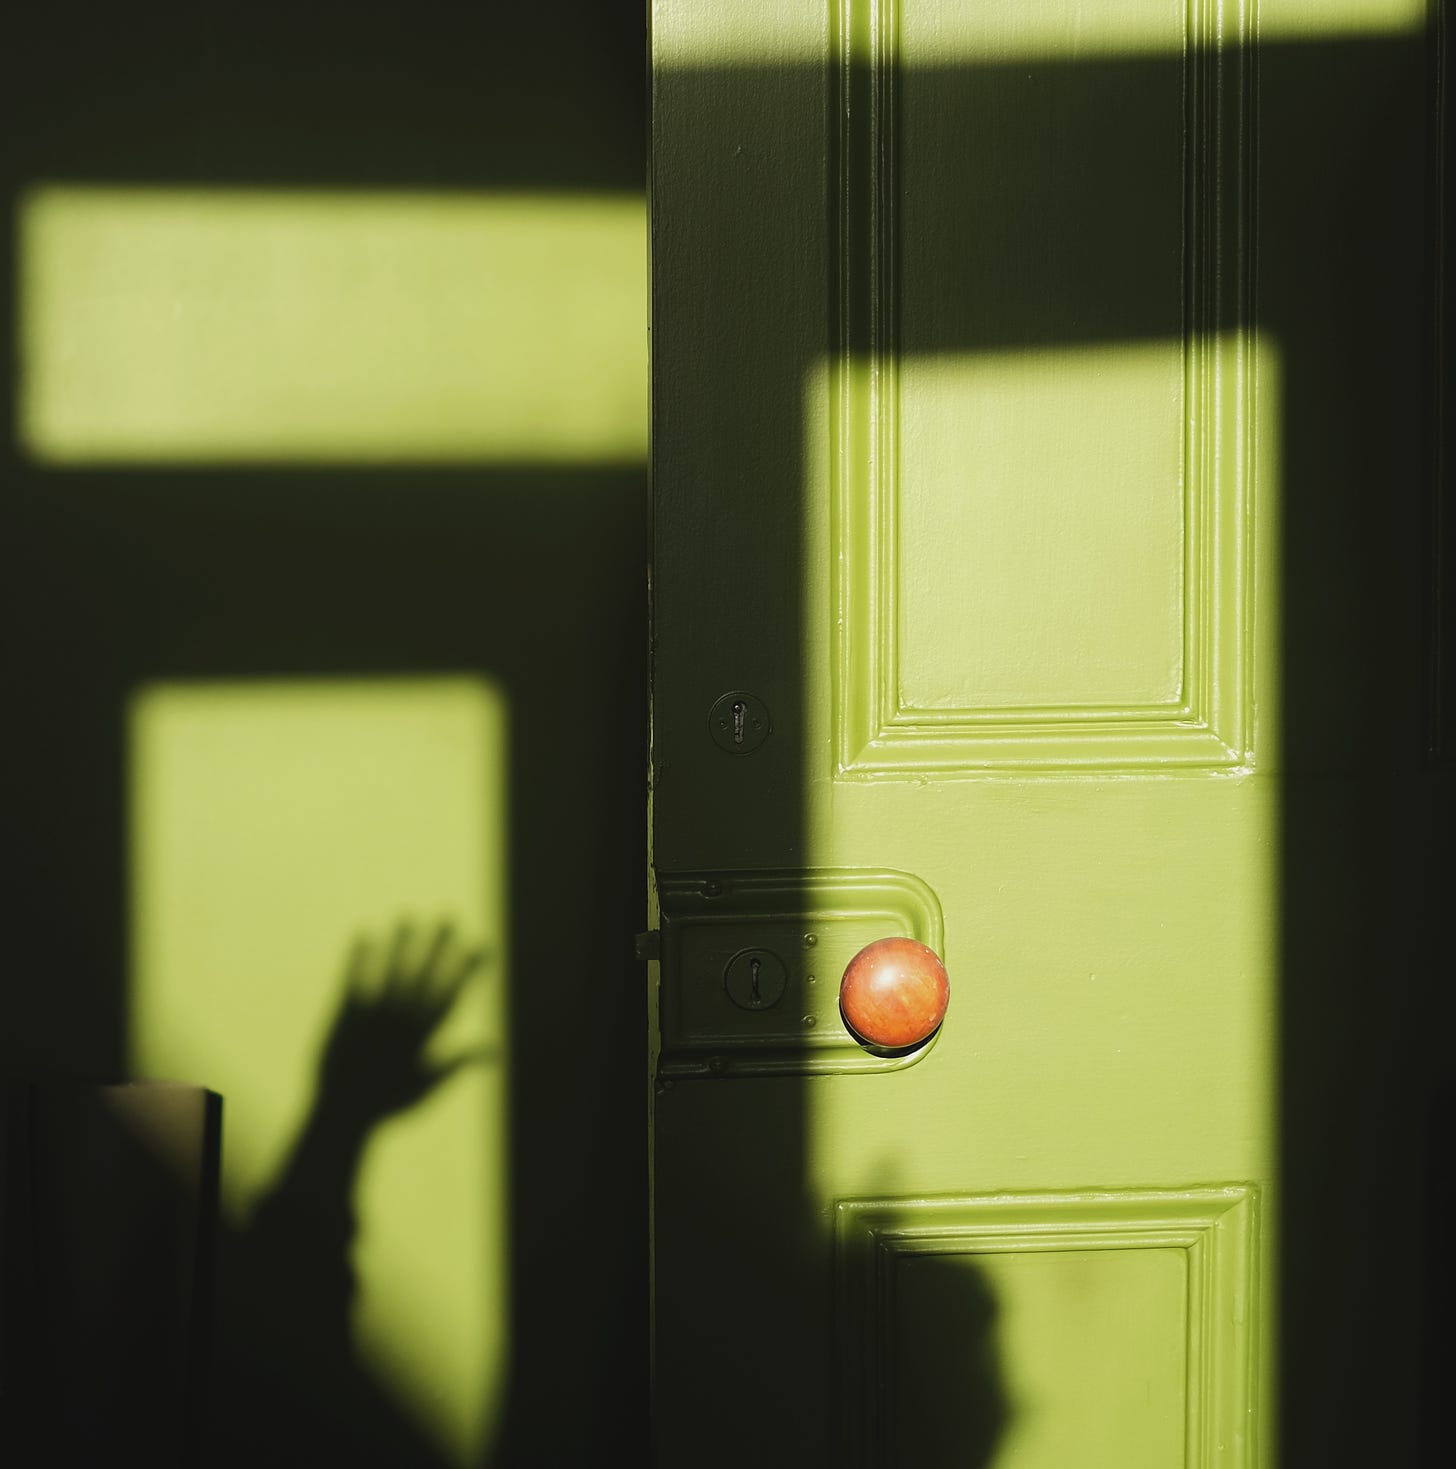 shadows fall across a partially open green door and wall. Charlene's silhoutte is visible. Her hand is raised in a wave.